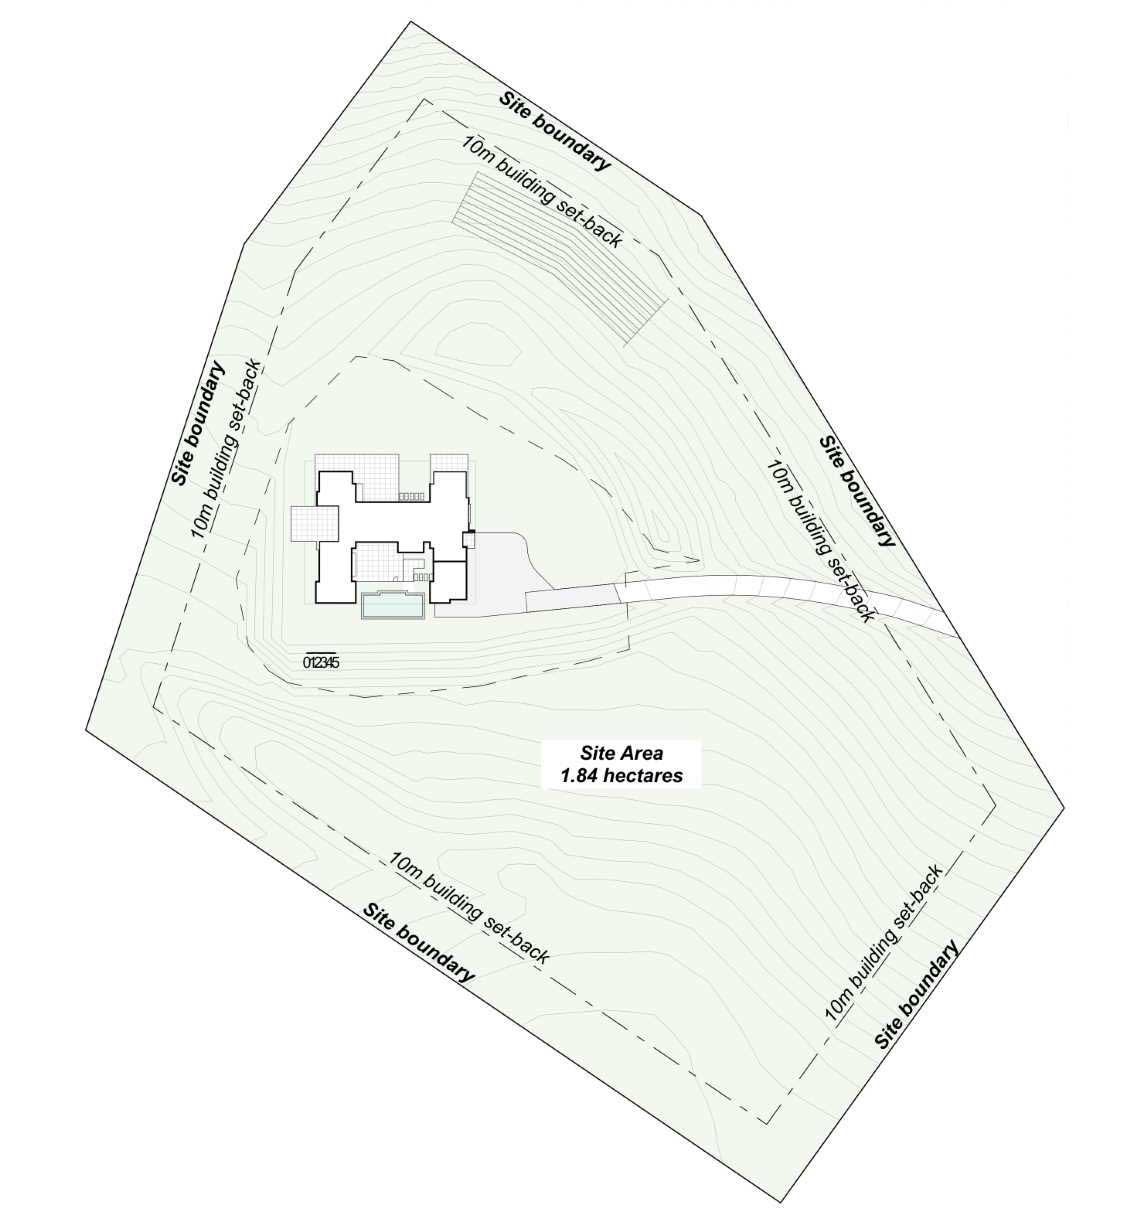 The site plan of a rural modern home.